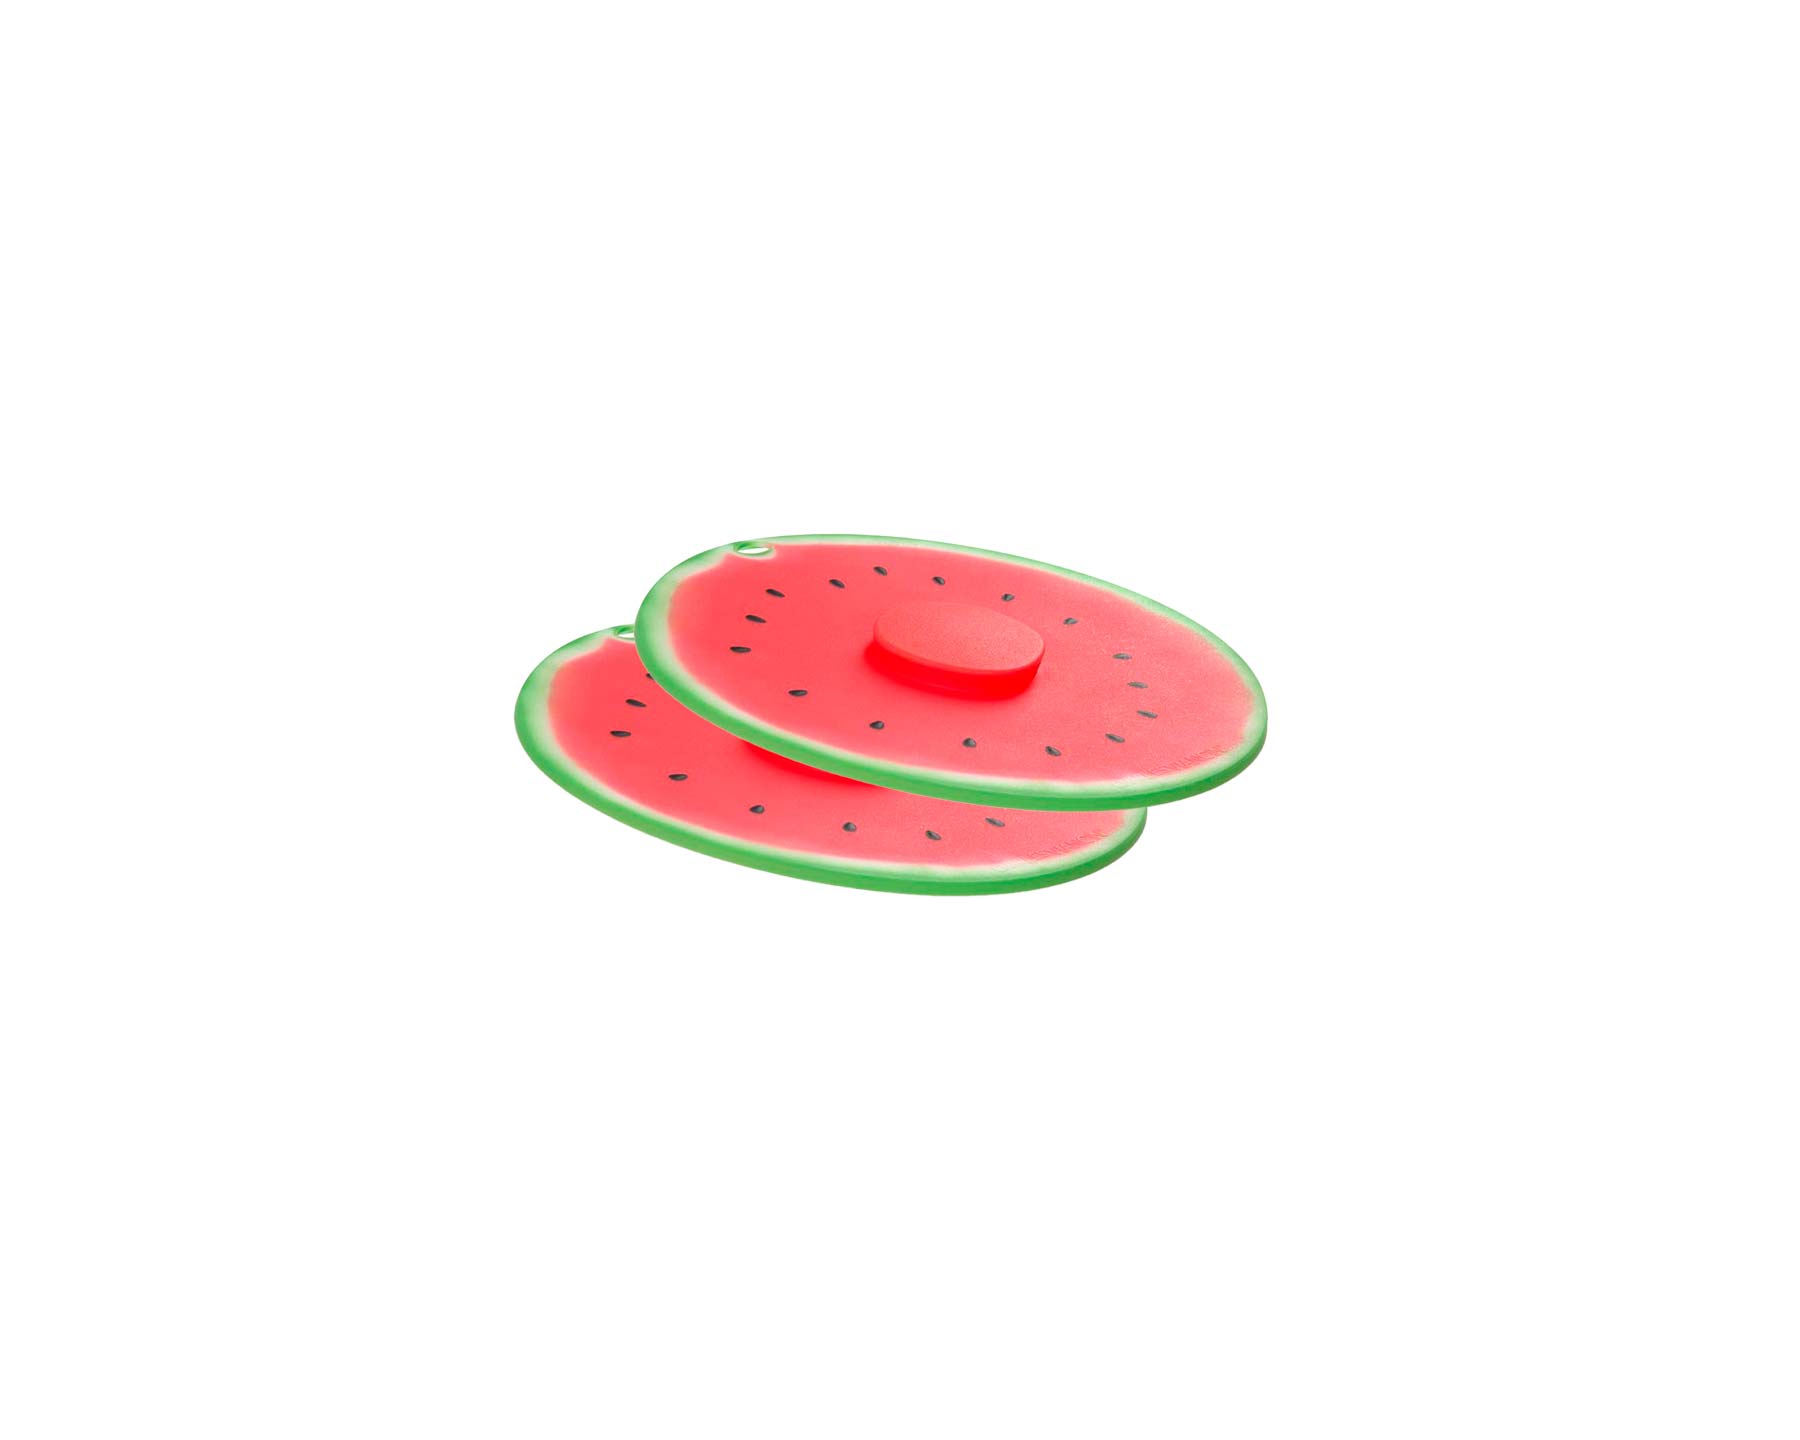 Set of two Watermelon drink covers by Charles Viancin